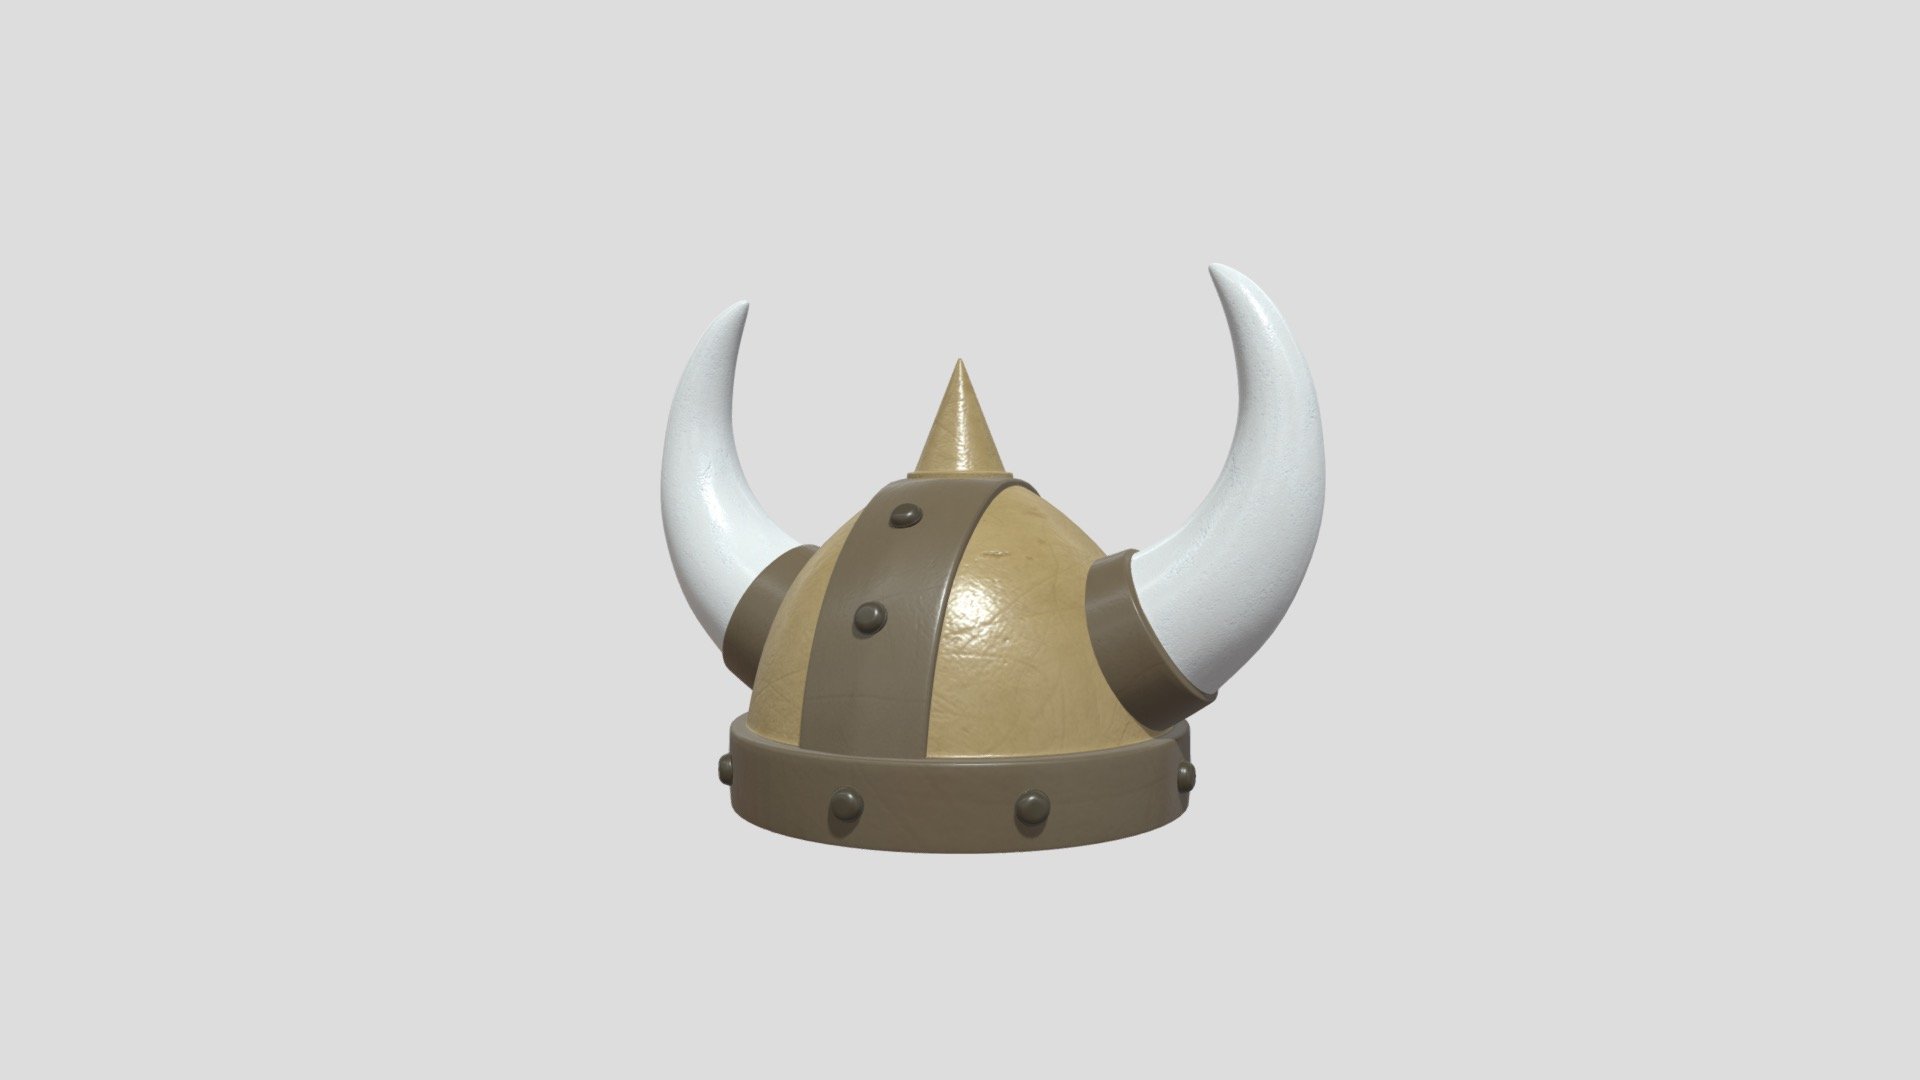 Subdivision Level: 1

Mirrored.

Textures: 1024 x 1024, Three colors on texture: Orange, Brown, White colors.

Materials: 2 - Viking Helmet, Bones.

Formats: .stl .obj .fbx .dae 

Origin located on bottom-center 

Polygons: 43368

Vertices: 22033

I hope you enjoy the model! - Viking Helmet - Buy Royalty Free 3D model by Ed+ (@EDplus) 3d model